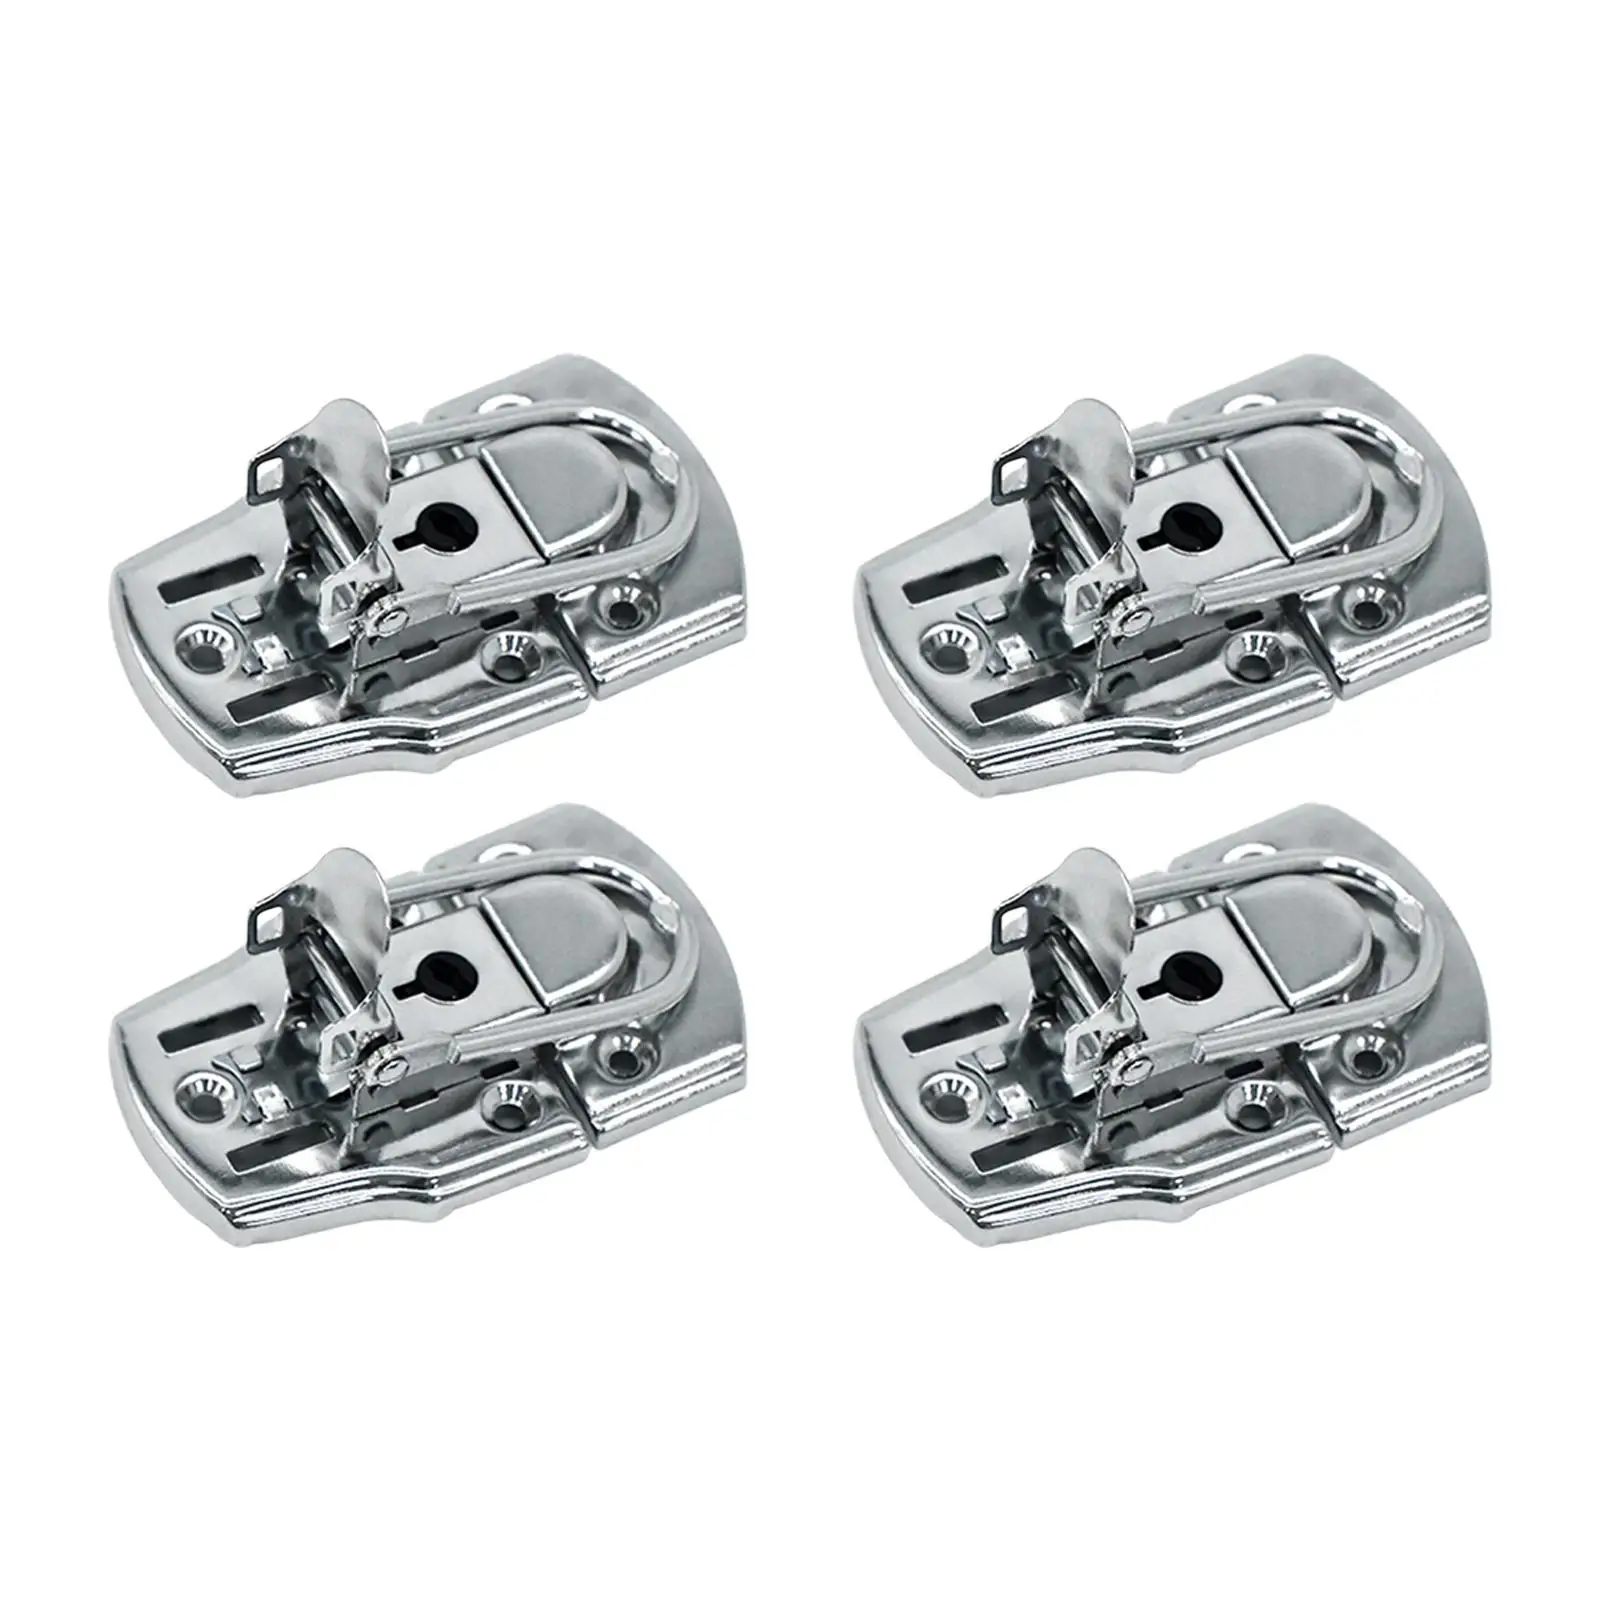 4x Toggle Hasp Latch Durable Smooth Locked Buckles for Wooden Box